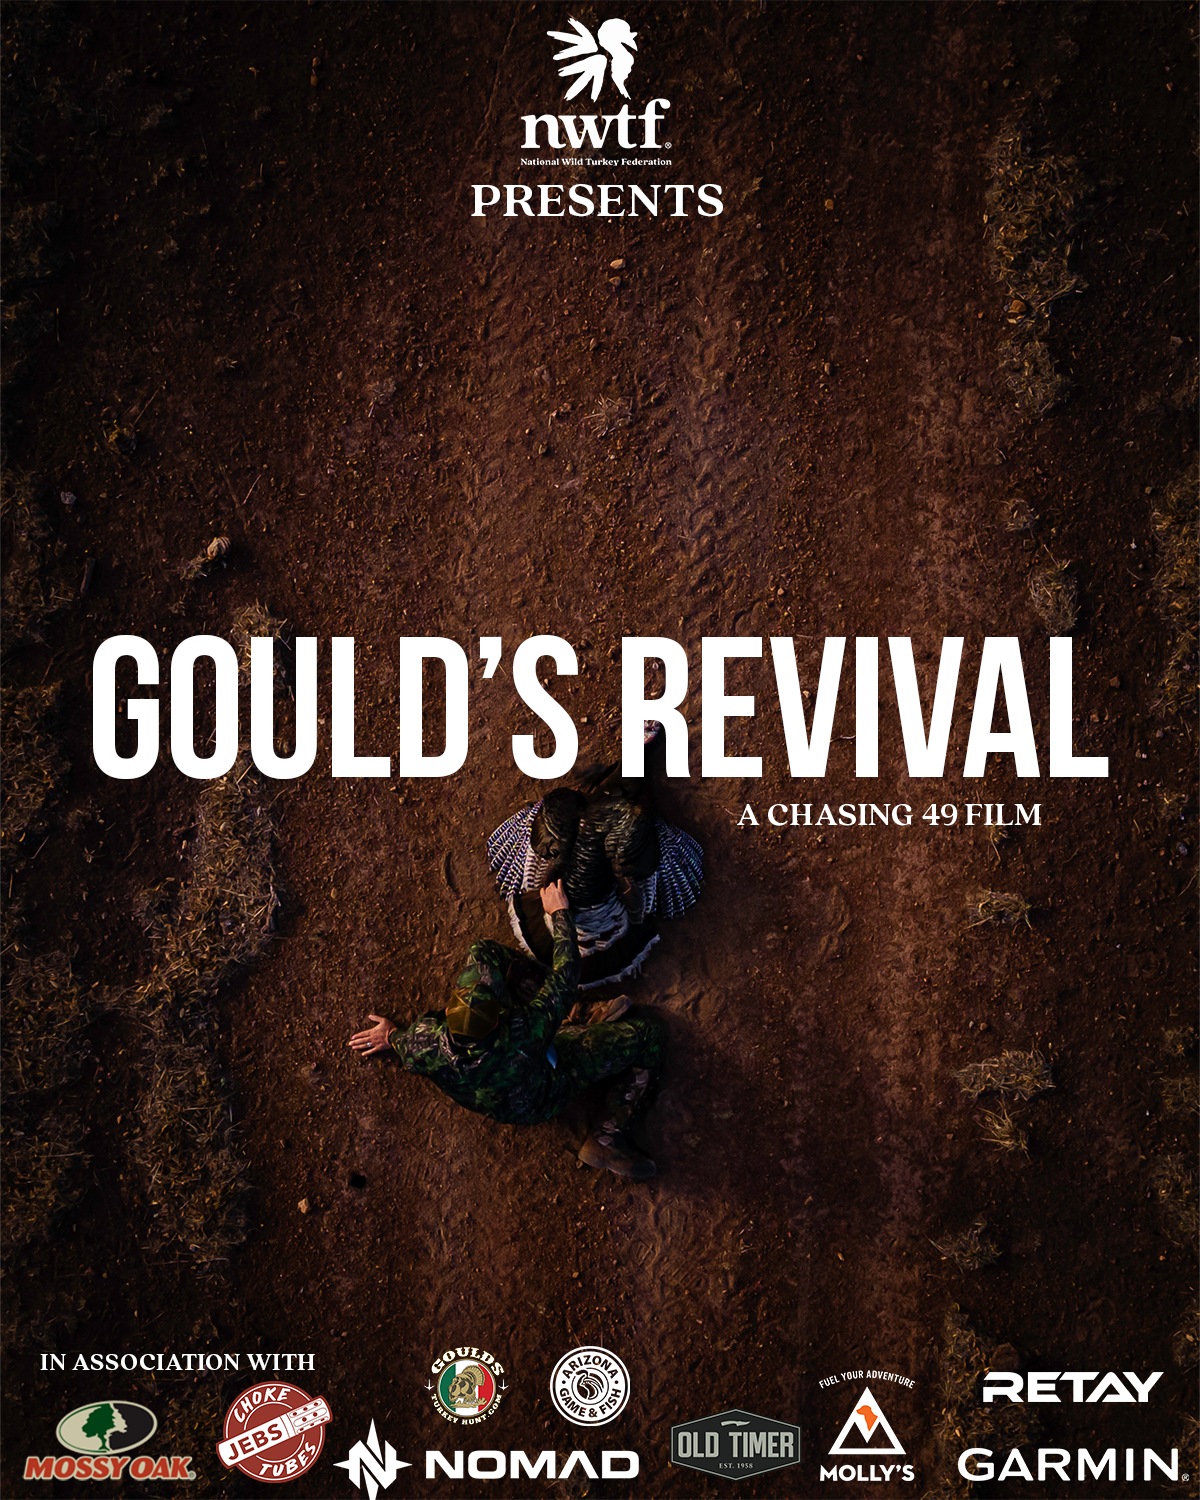 Gould's revival